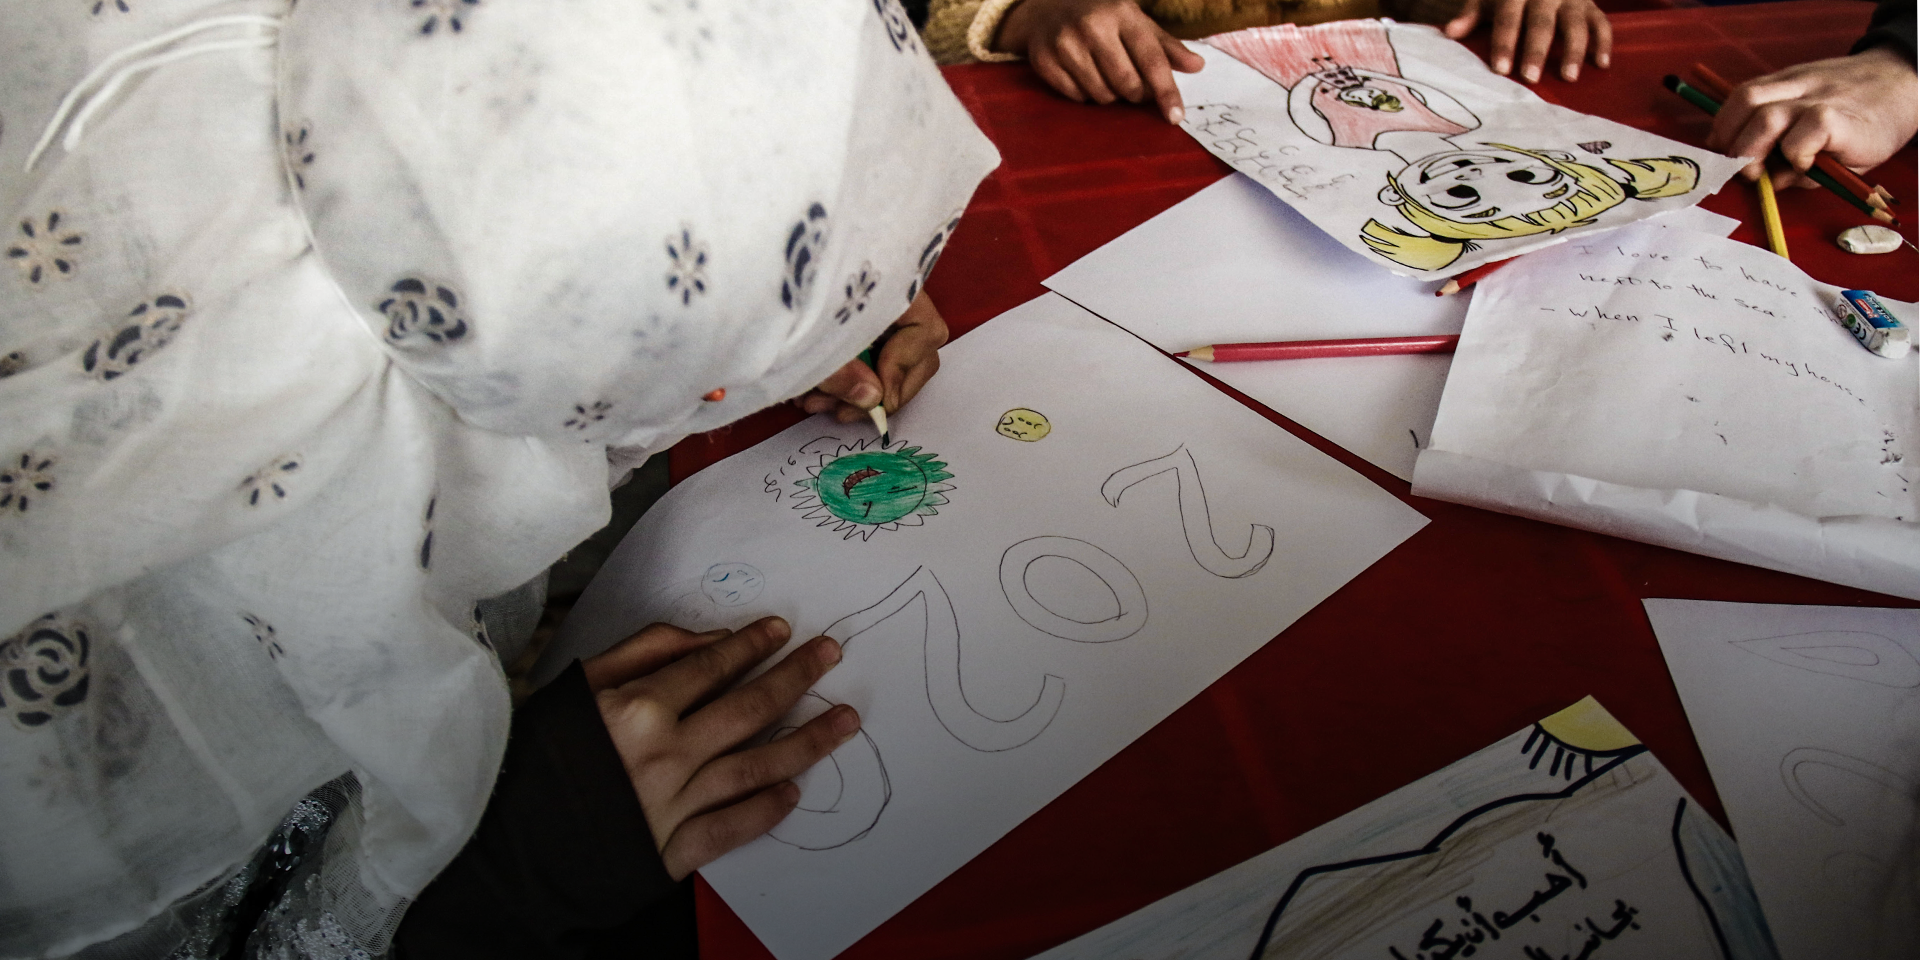 Syrian schoolgirls drawing pictures on their desks at school.